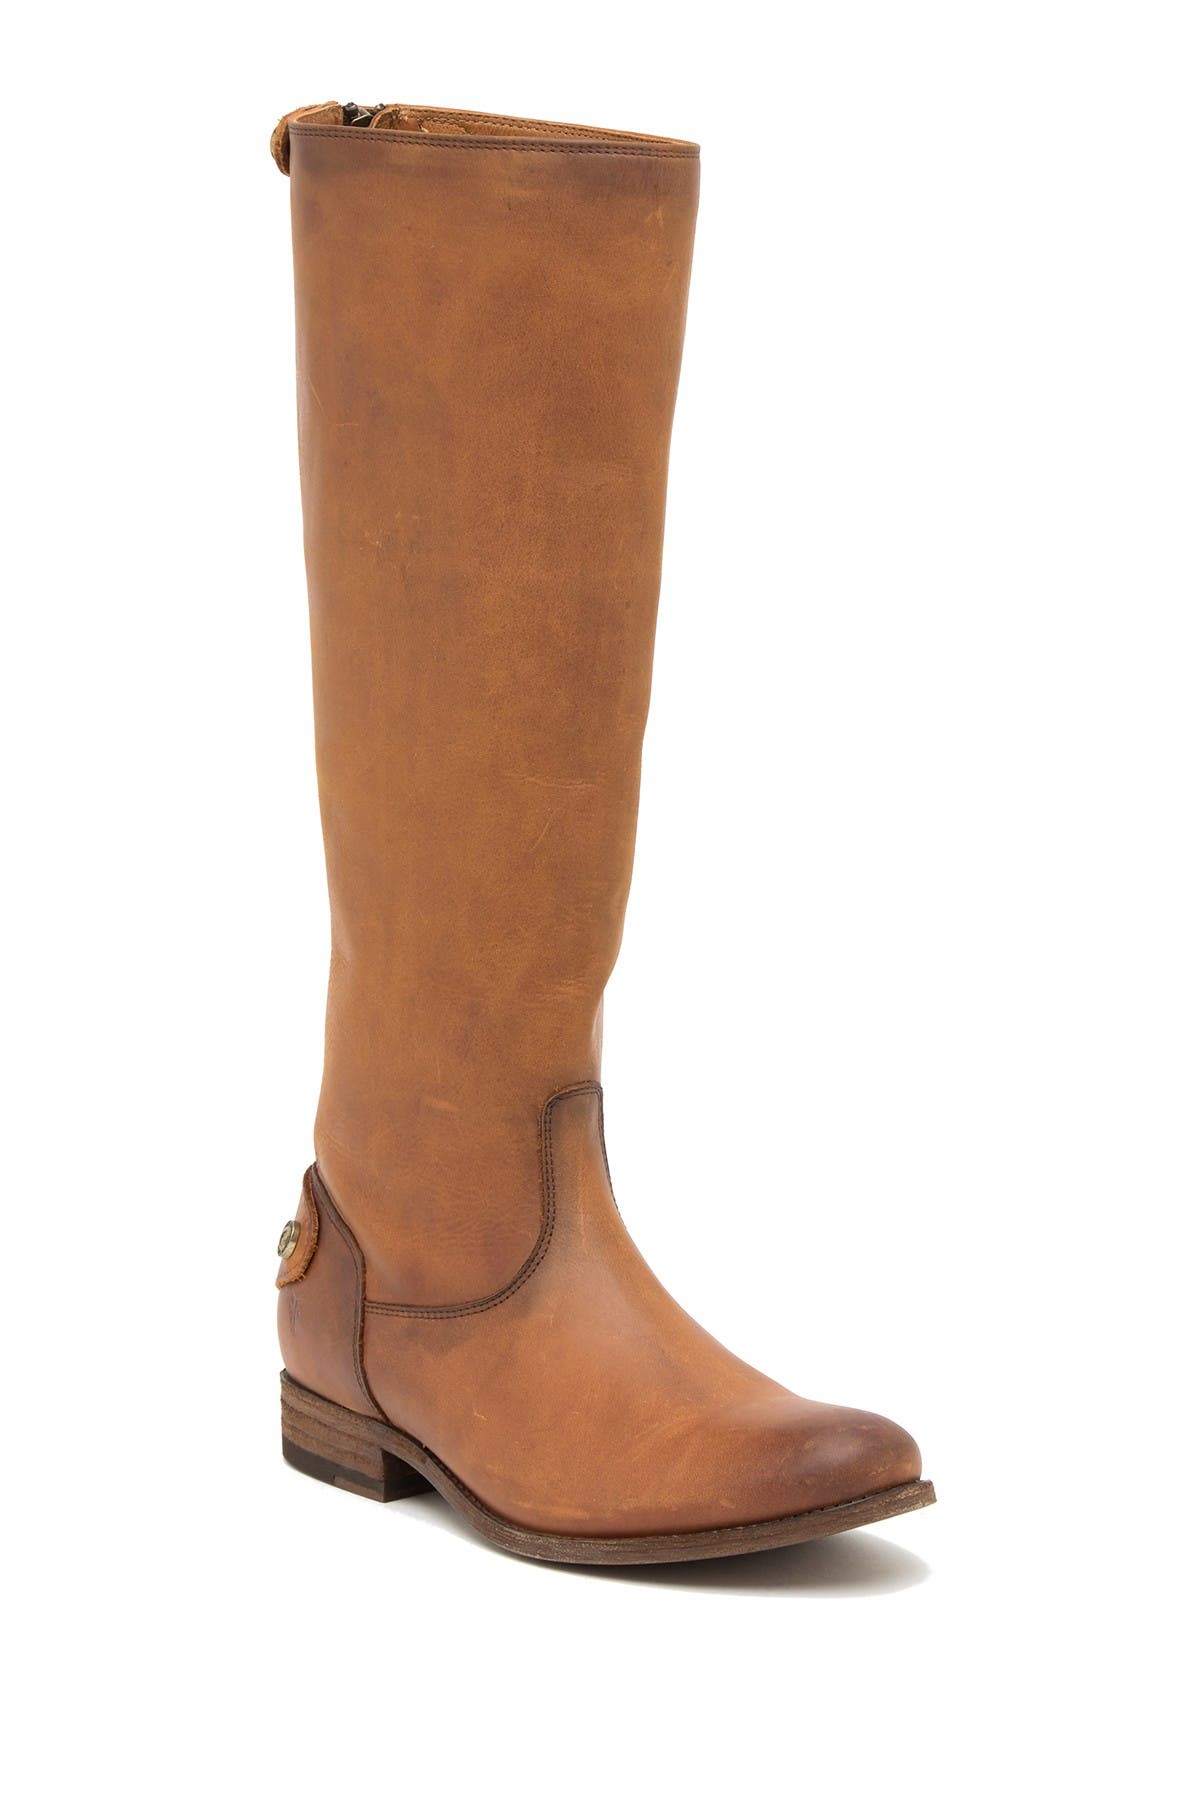 nordstrom womens frye boots